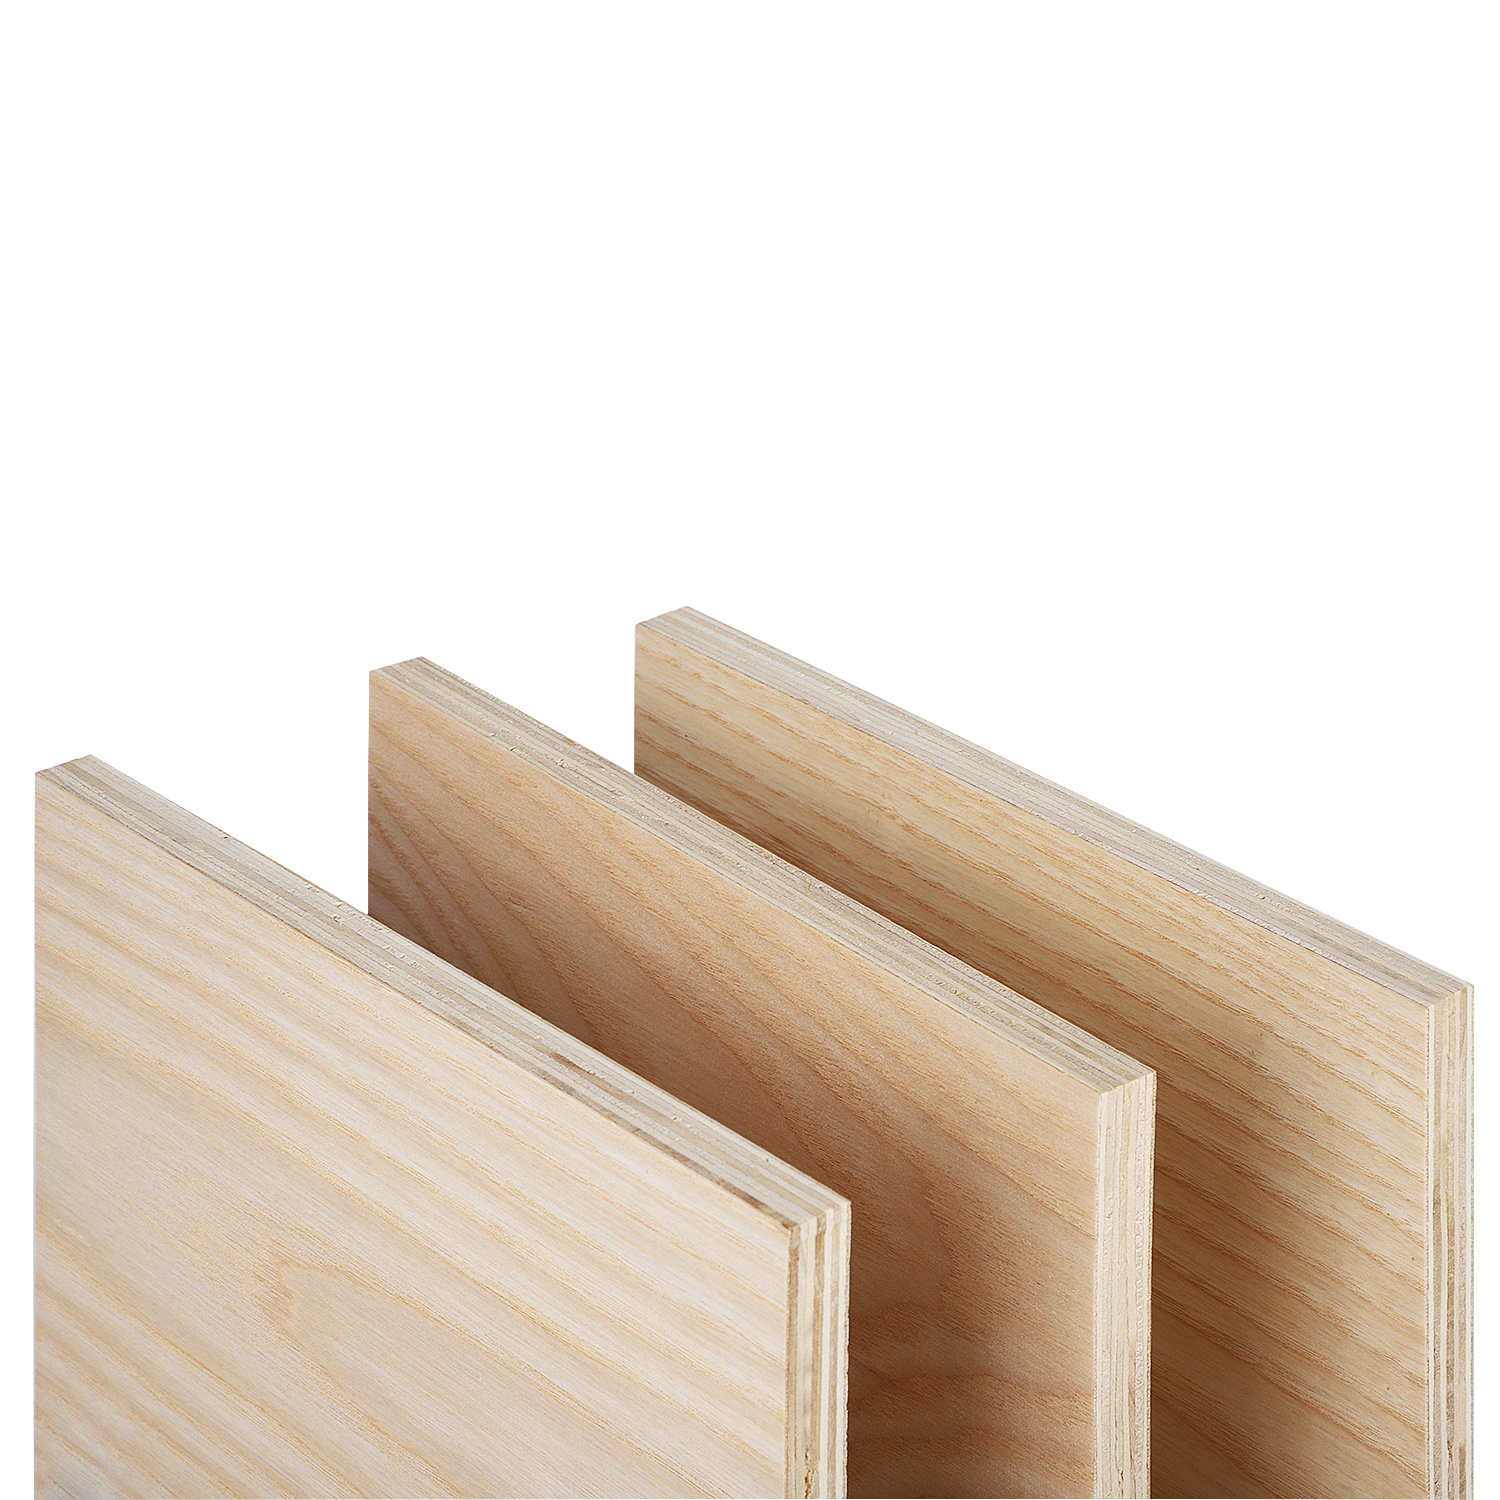 Shandong Province High Quality Oak Wood Faced Ply Wood Fancy Plywood Board for Furniture